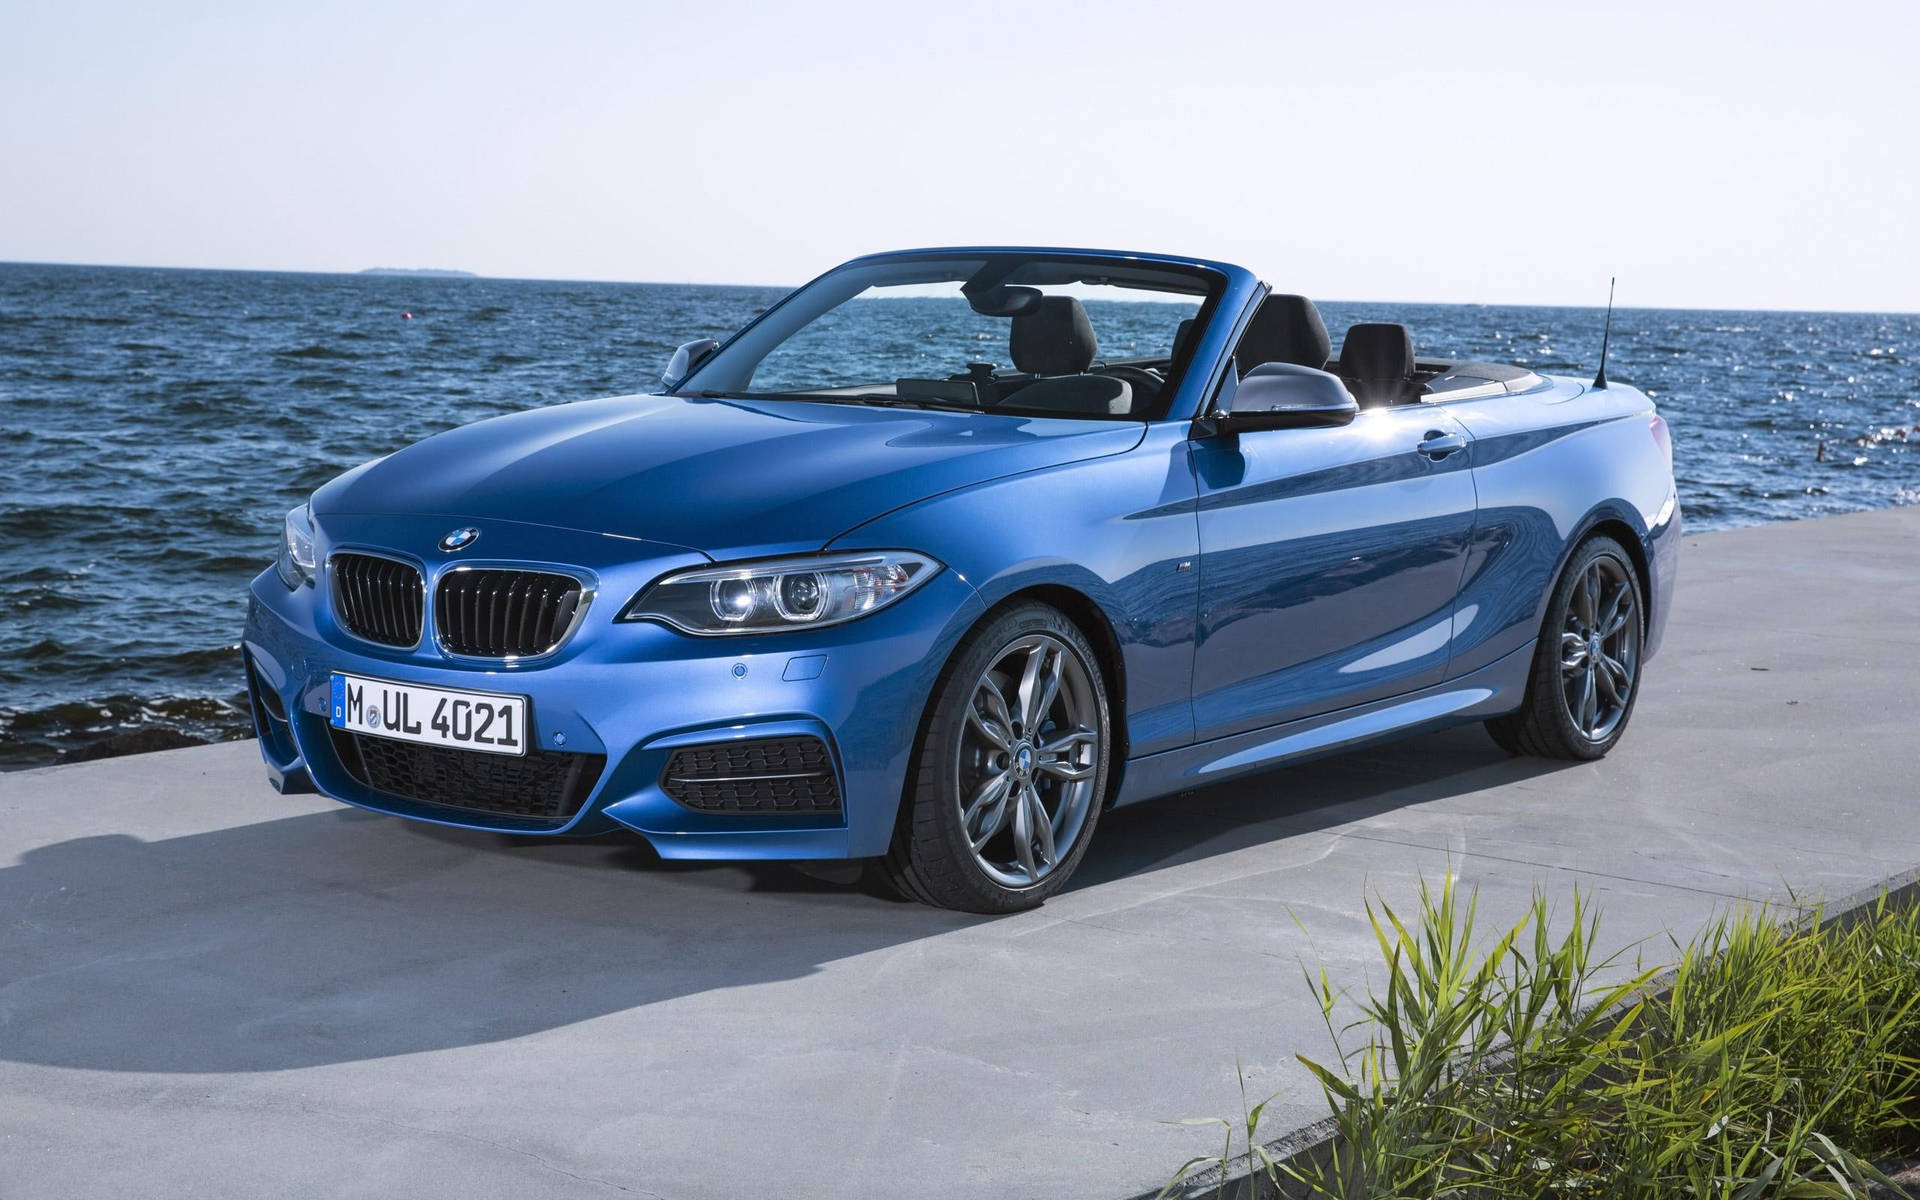 The 2023 Bmw M4 Luxury Sports Car Showcasing Its Sleek Design And Muscular Stance. Wallpaper